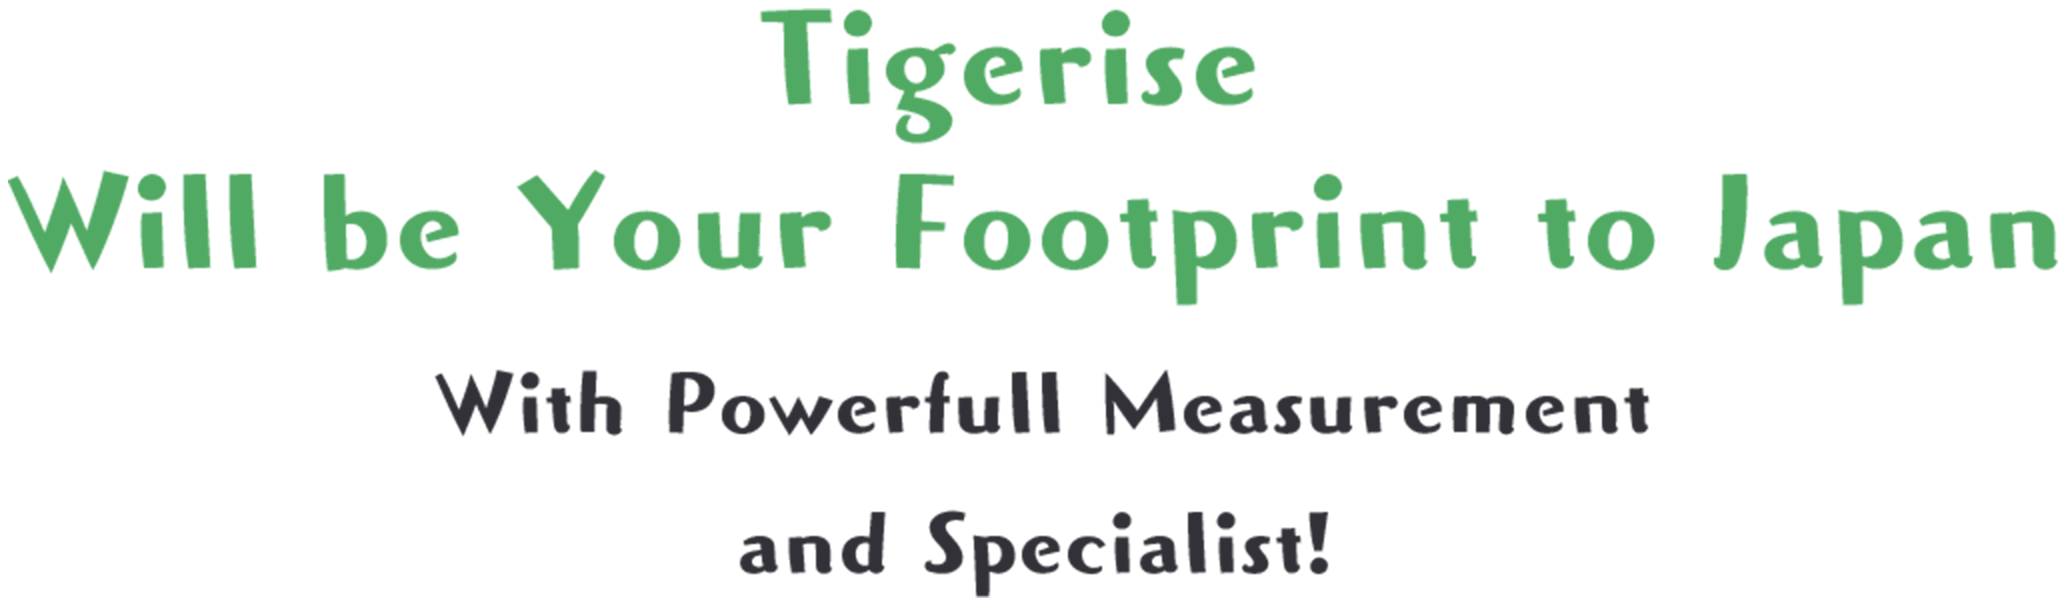 Tigerise Will be Your Footprint to Japan With Powerfull Measurement and Specialist!